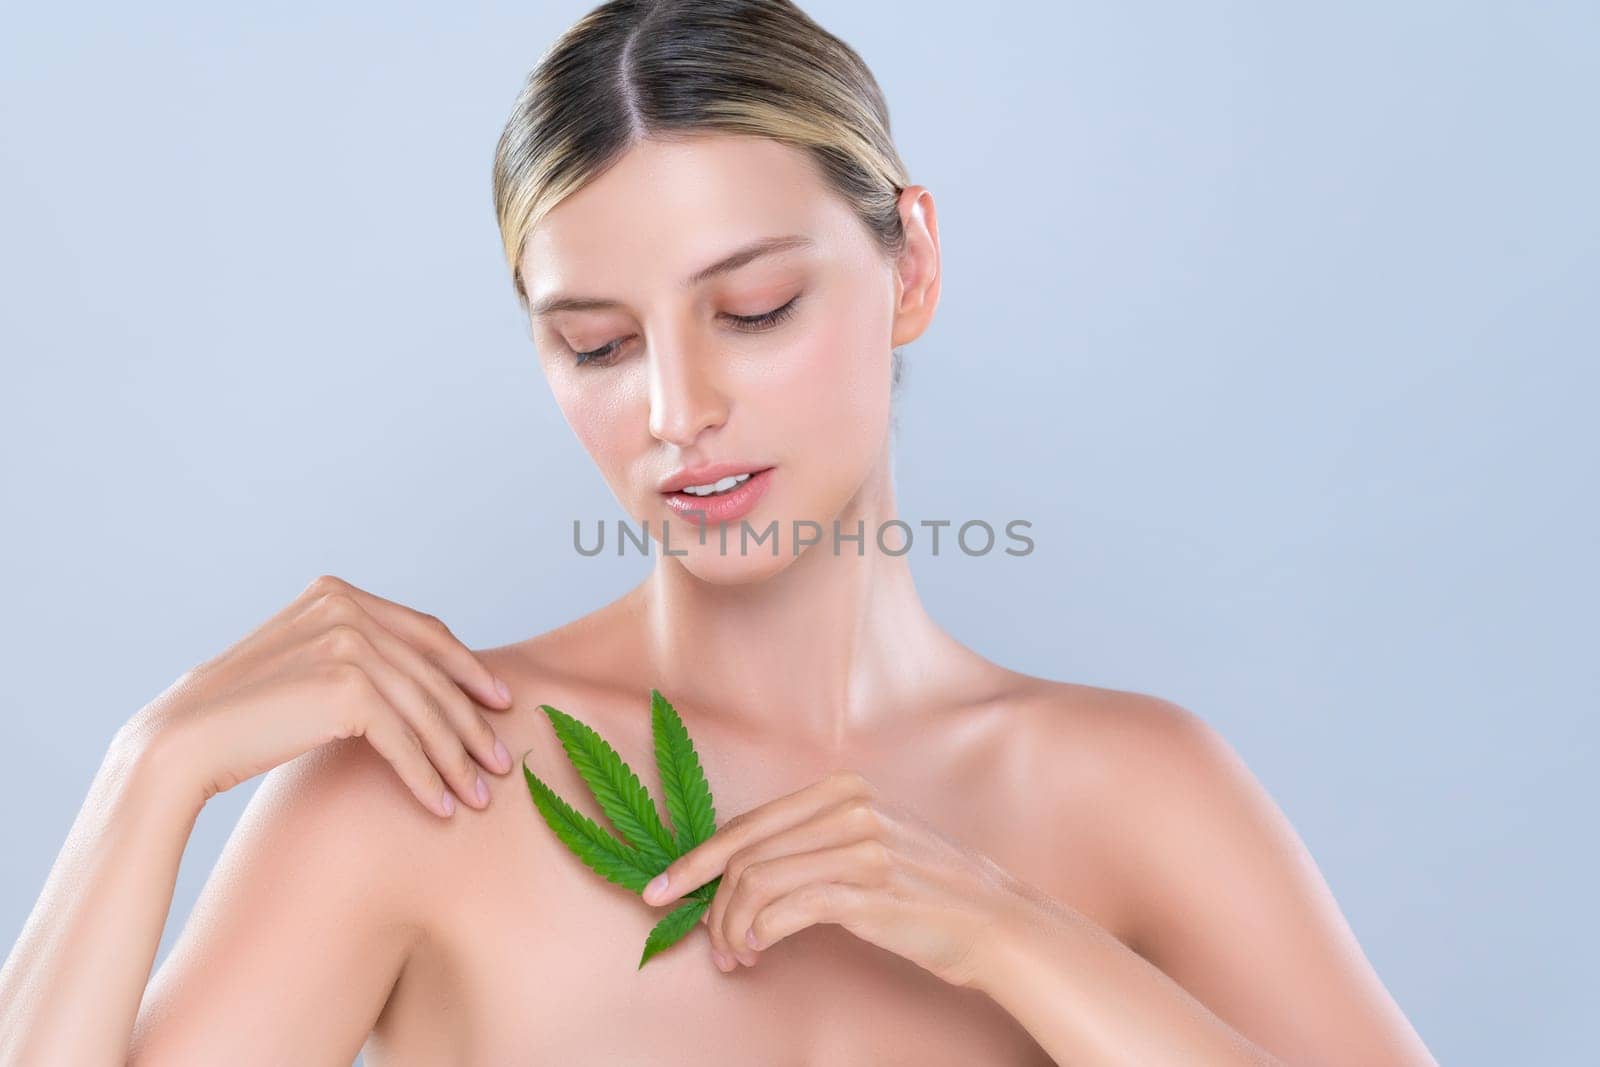 Alluring beautiful woman model portrait holding green leaf as concept for cannabis skincare cosmetic product for skin freshness treatment in isolated background.